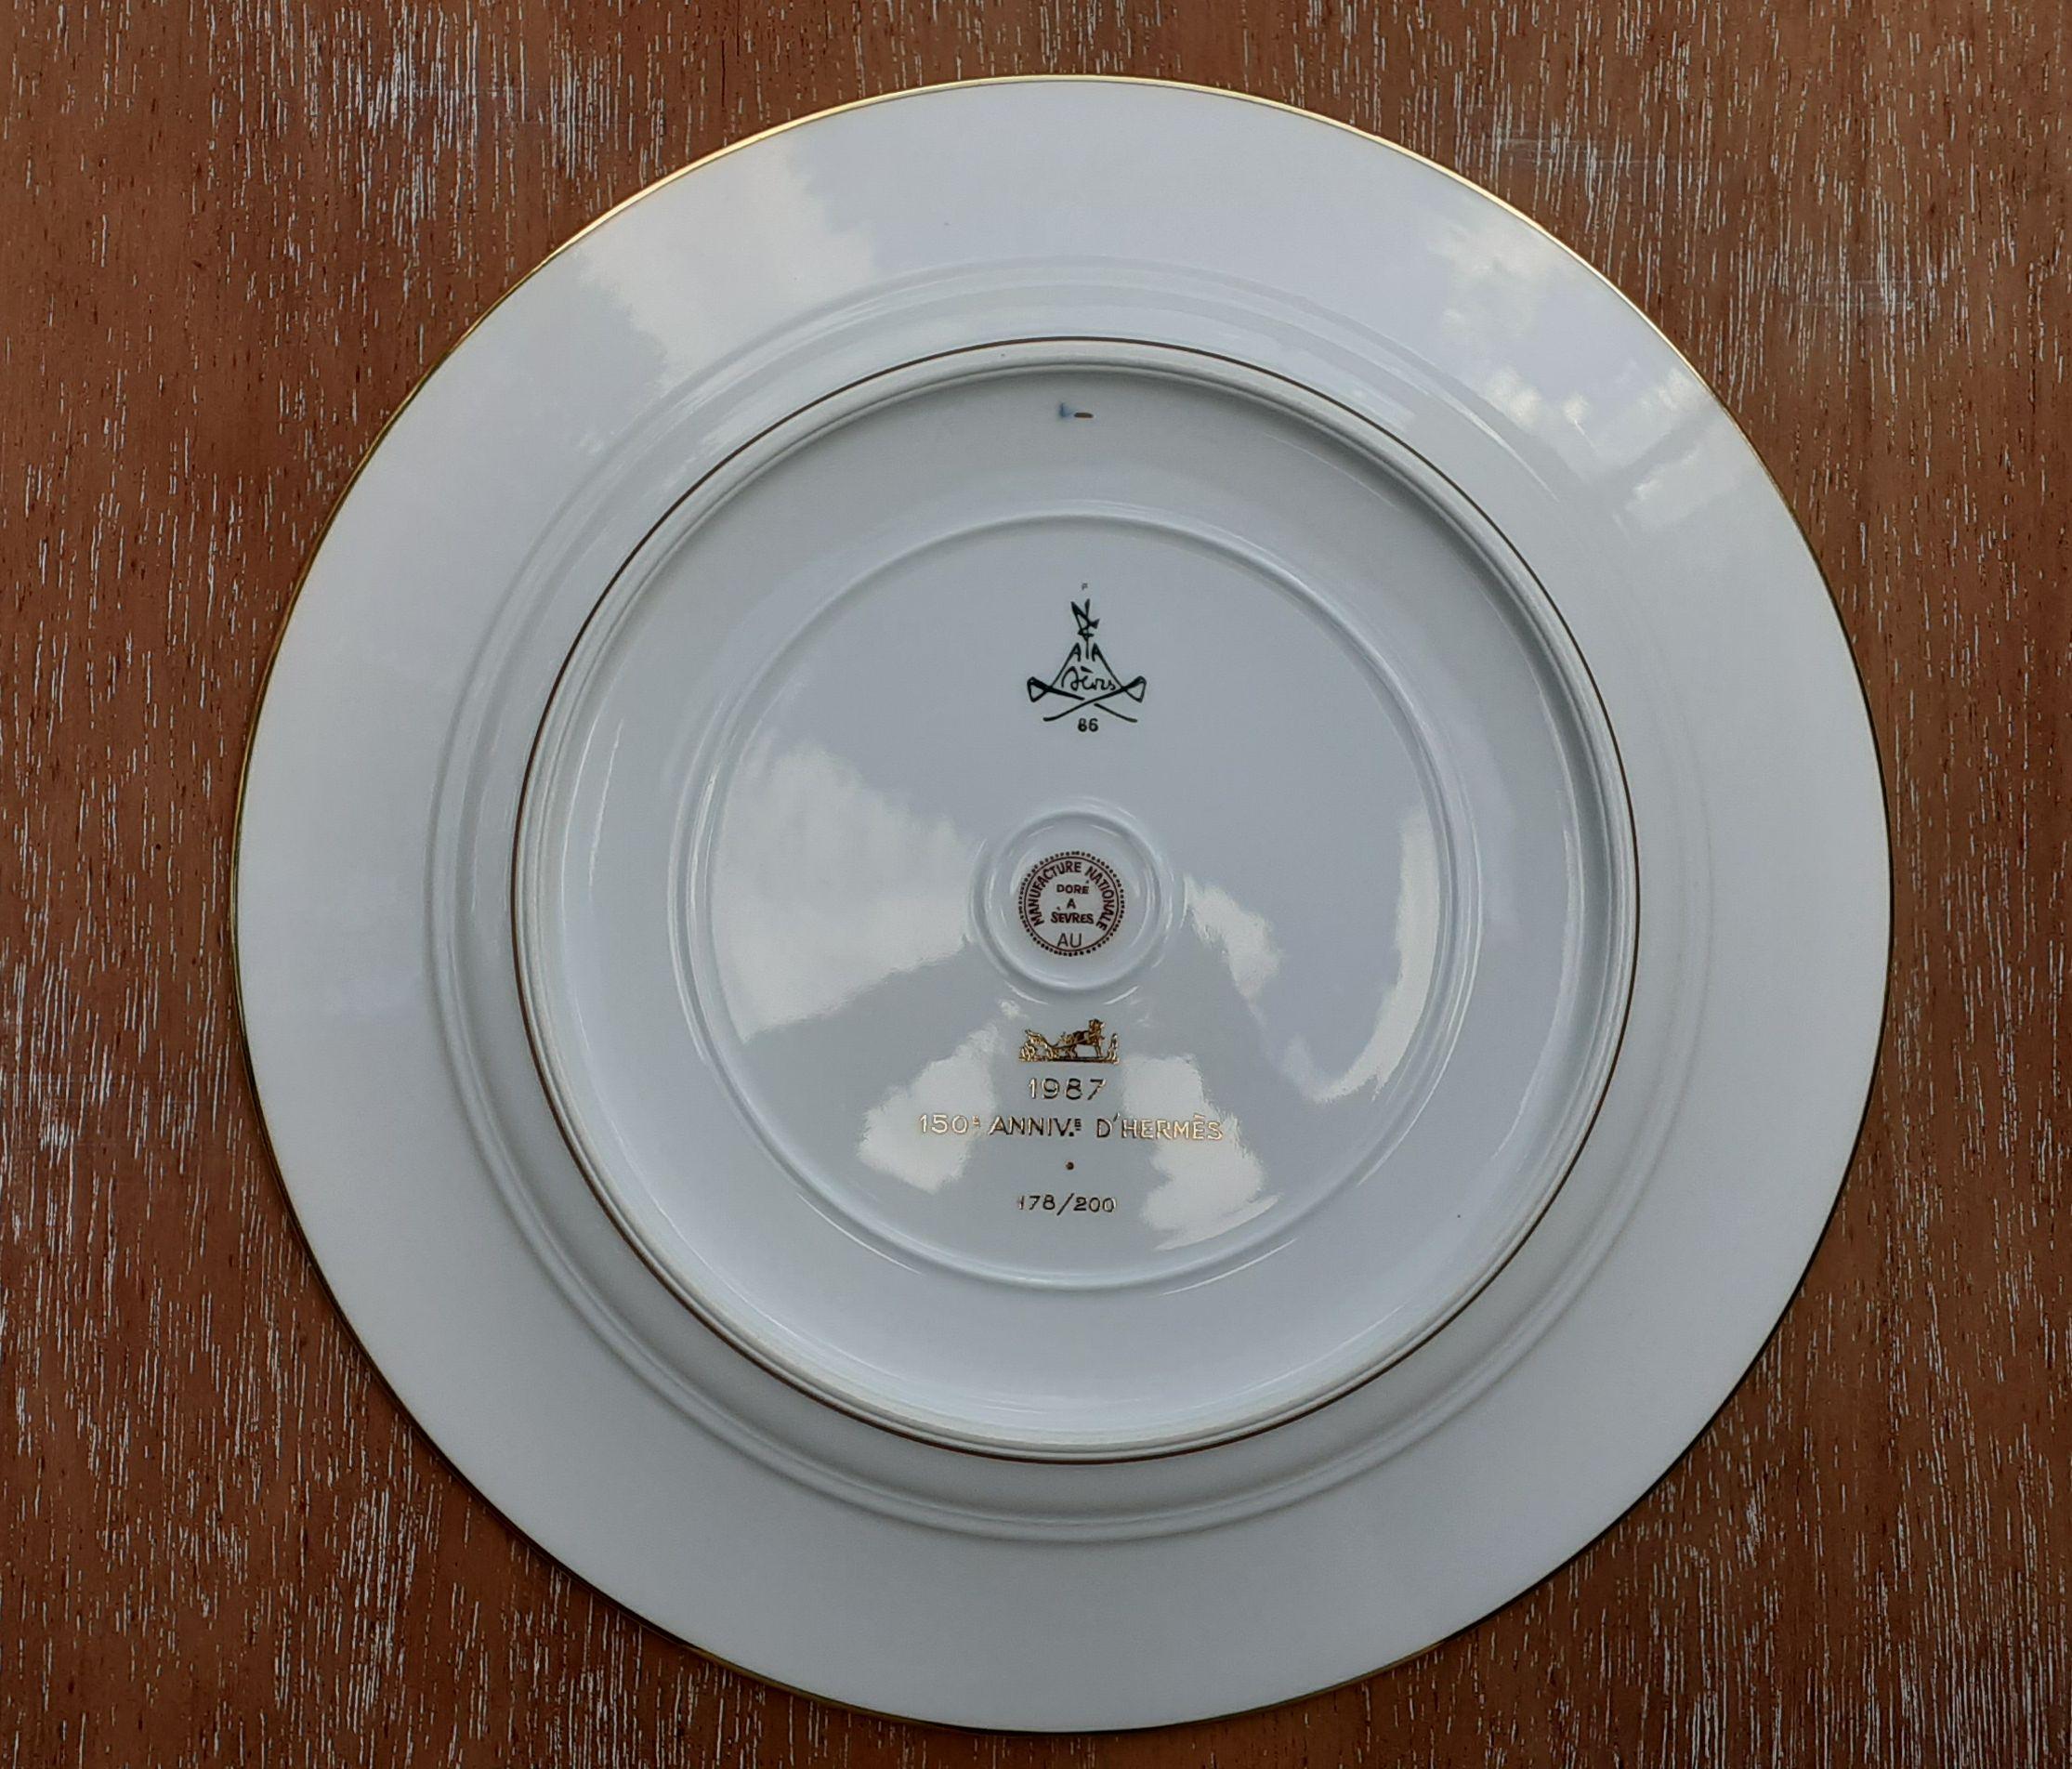 Exceptional Hermès Plate Dish Feux d'Artifice 150th Anniversary Only 200 Pieces For Sale 4